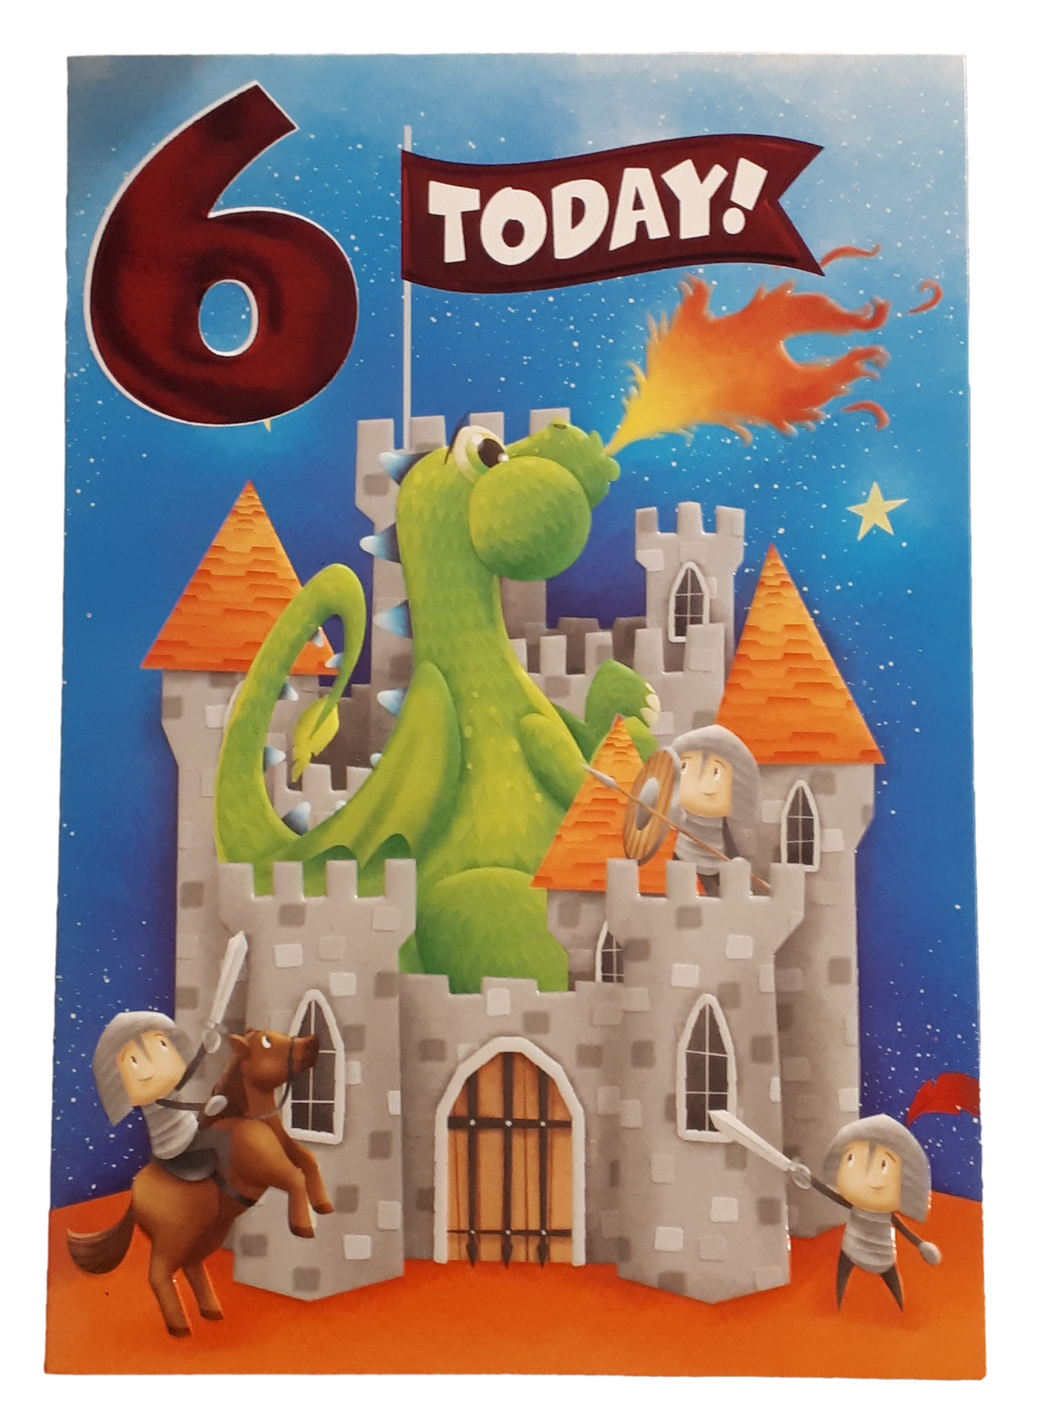 Age 6 - 6th Birthday Card - Dragons / Castles - Greeting Card - Free Postage